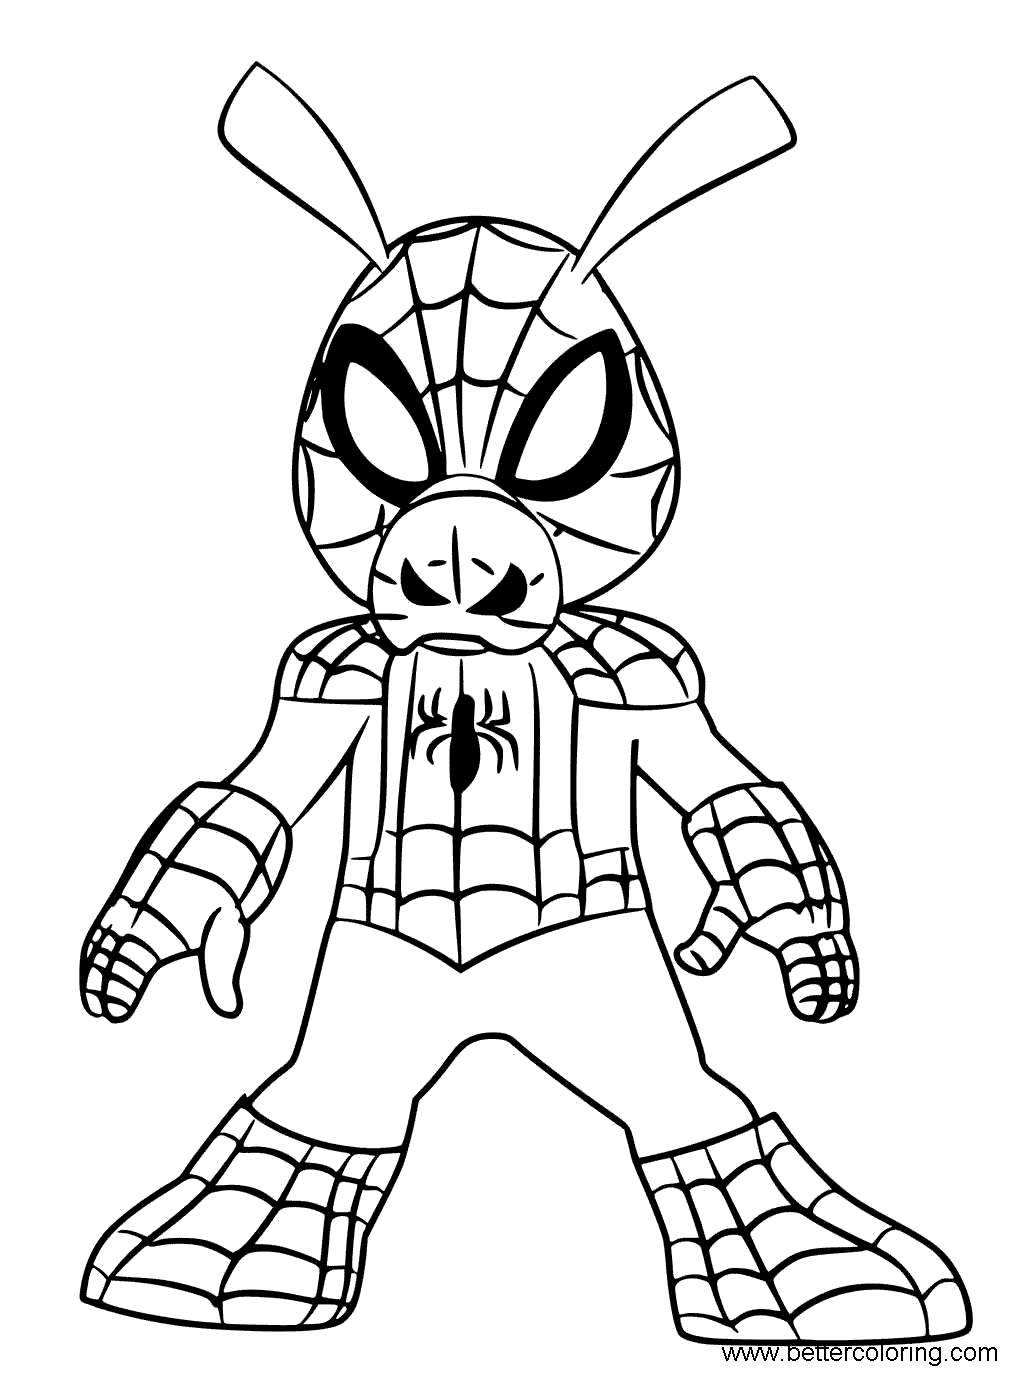 Free Miles Morales Coloring Pages Spider Ham printable